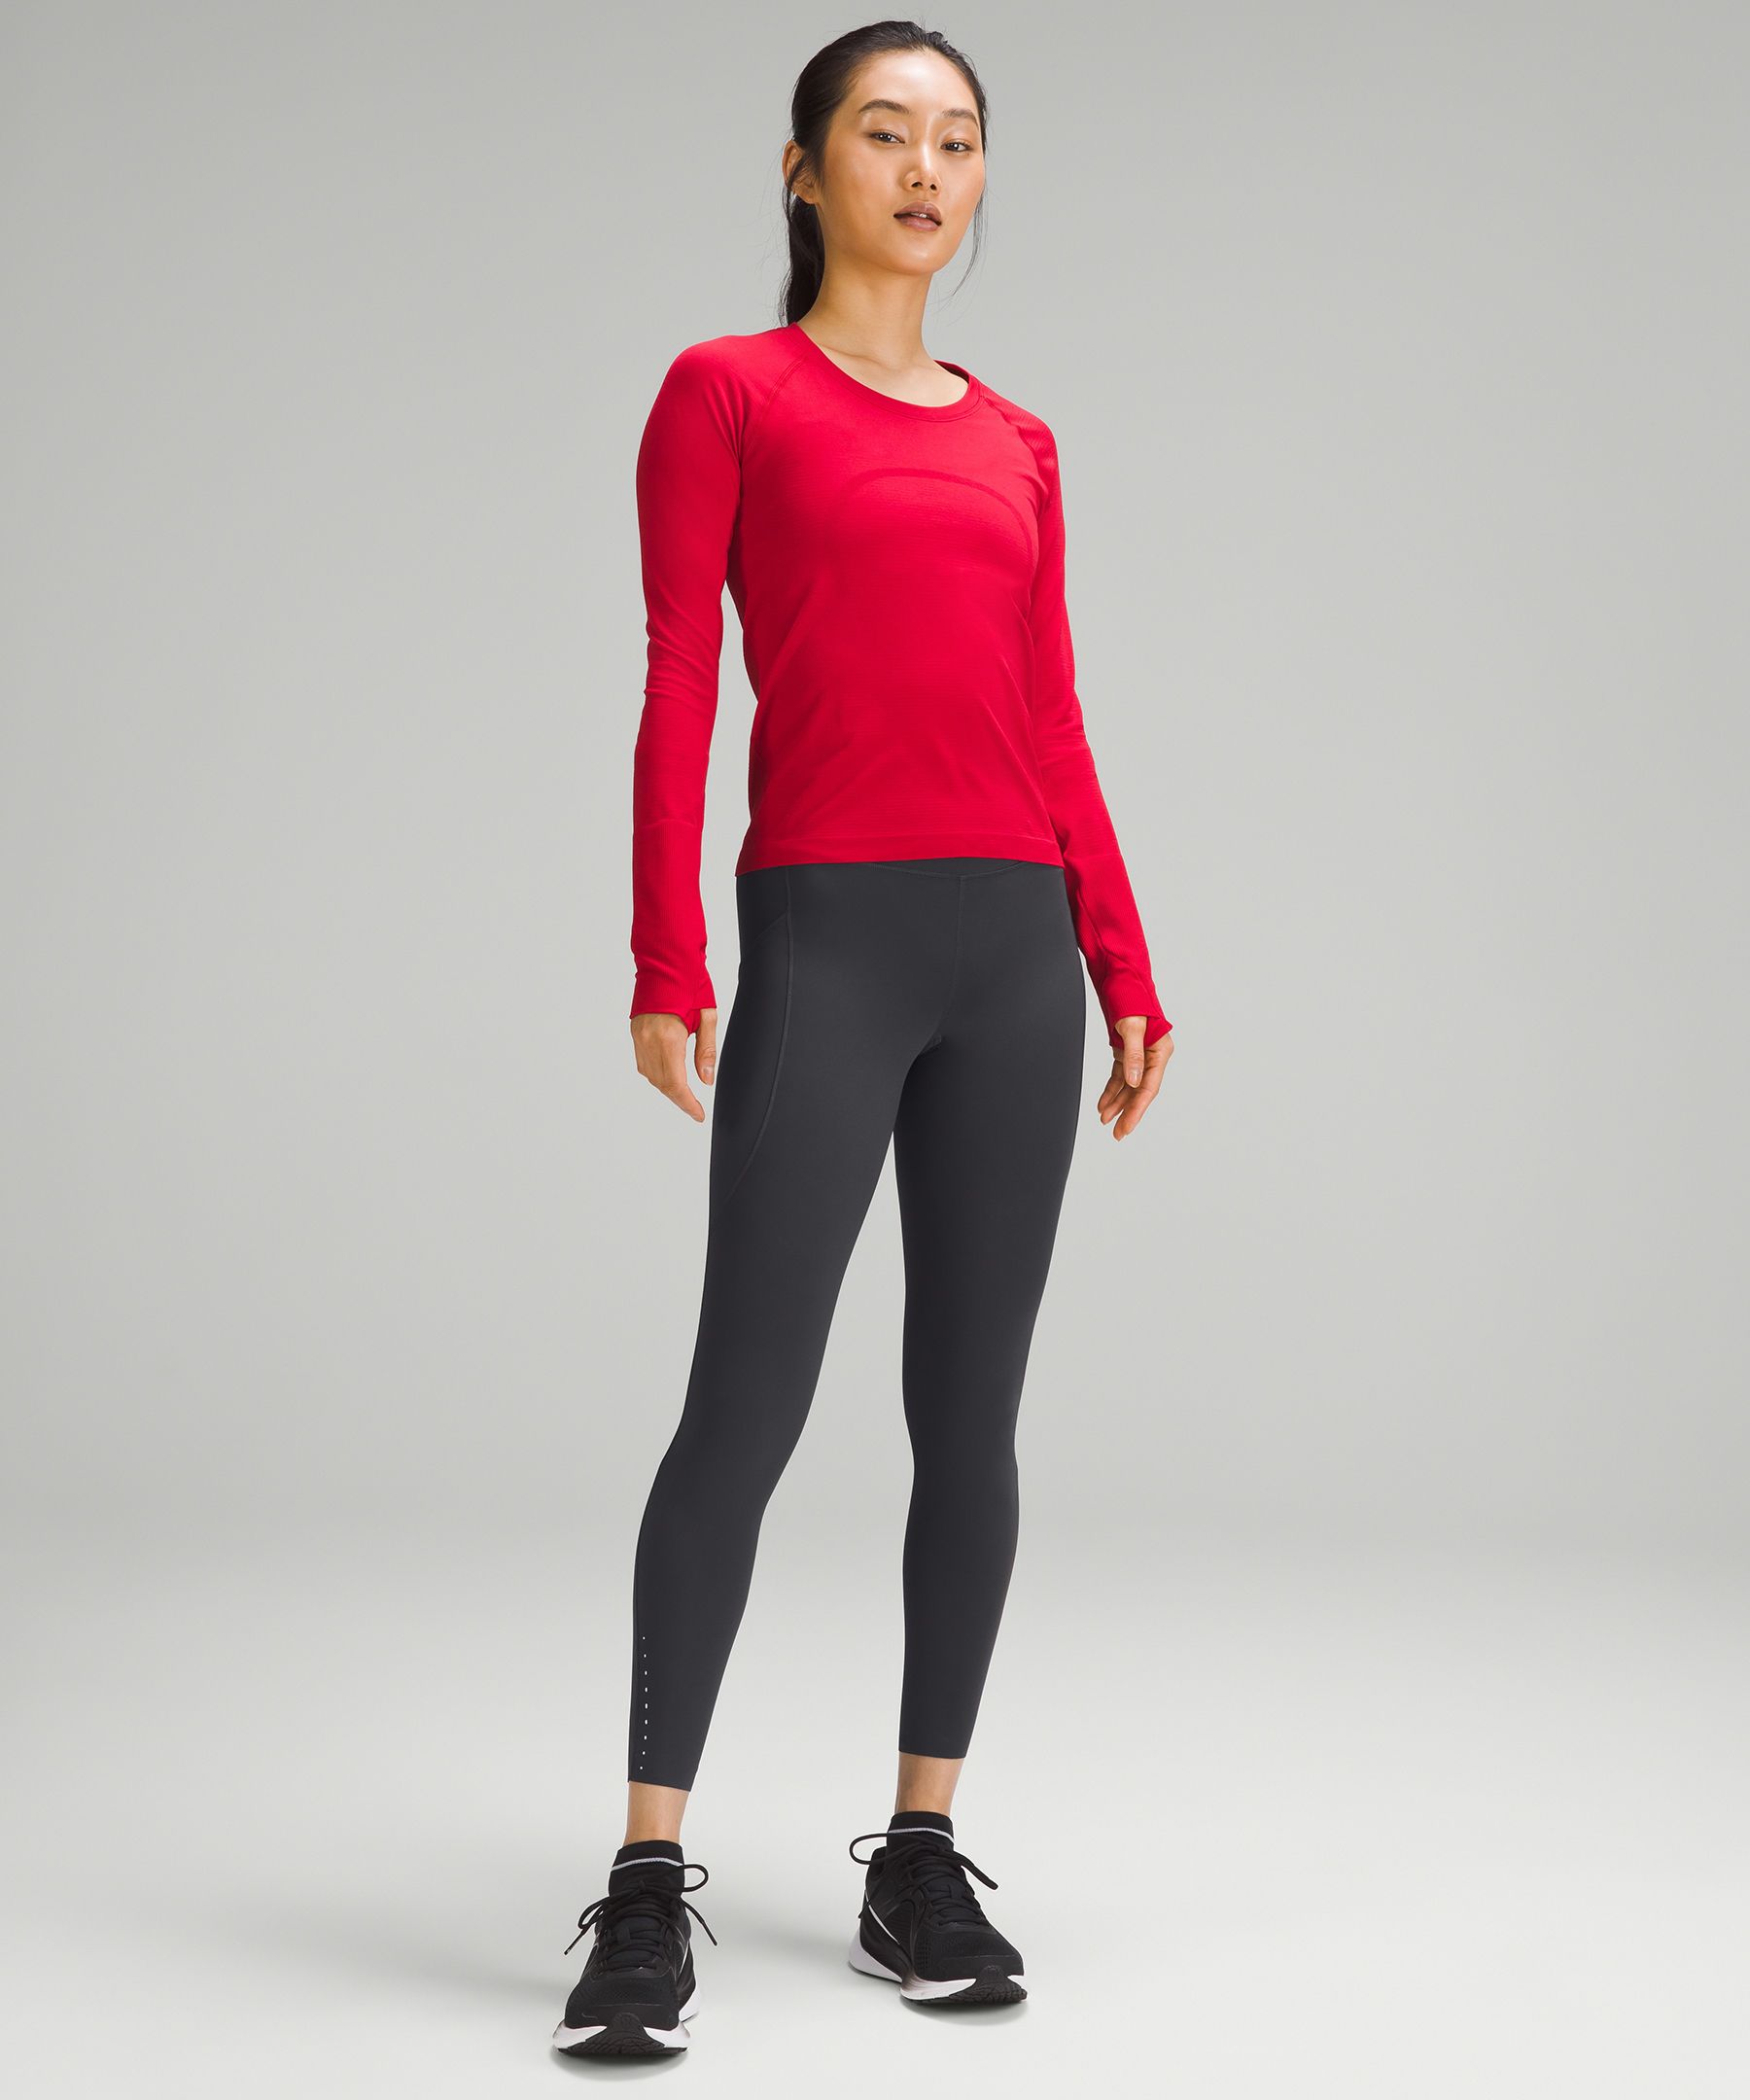 Invigorate Asia Fit Lululemon 24 size S red leggings with pockets, Women's  Fashion, Activewear on Carousell